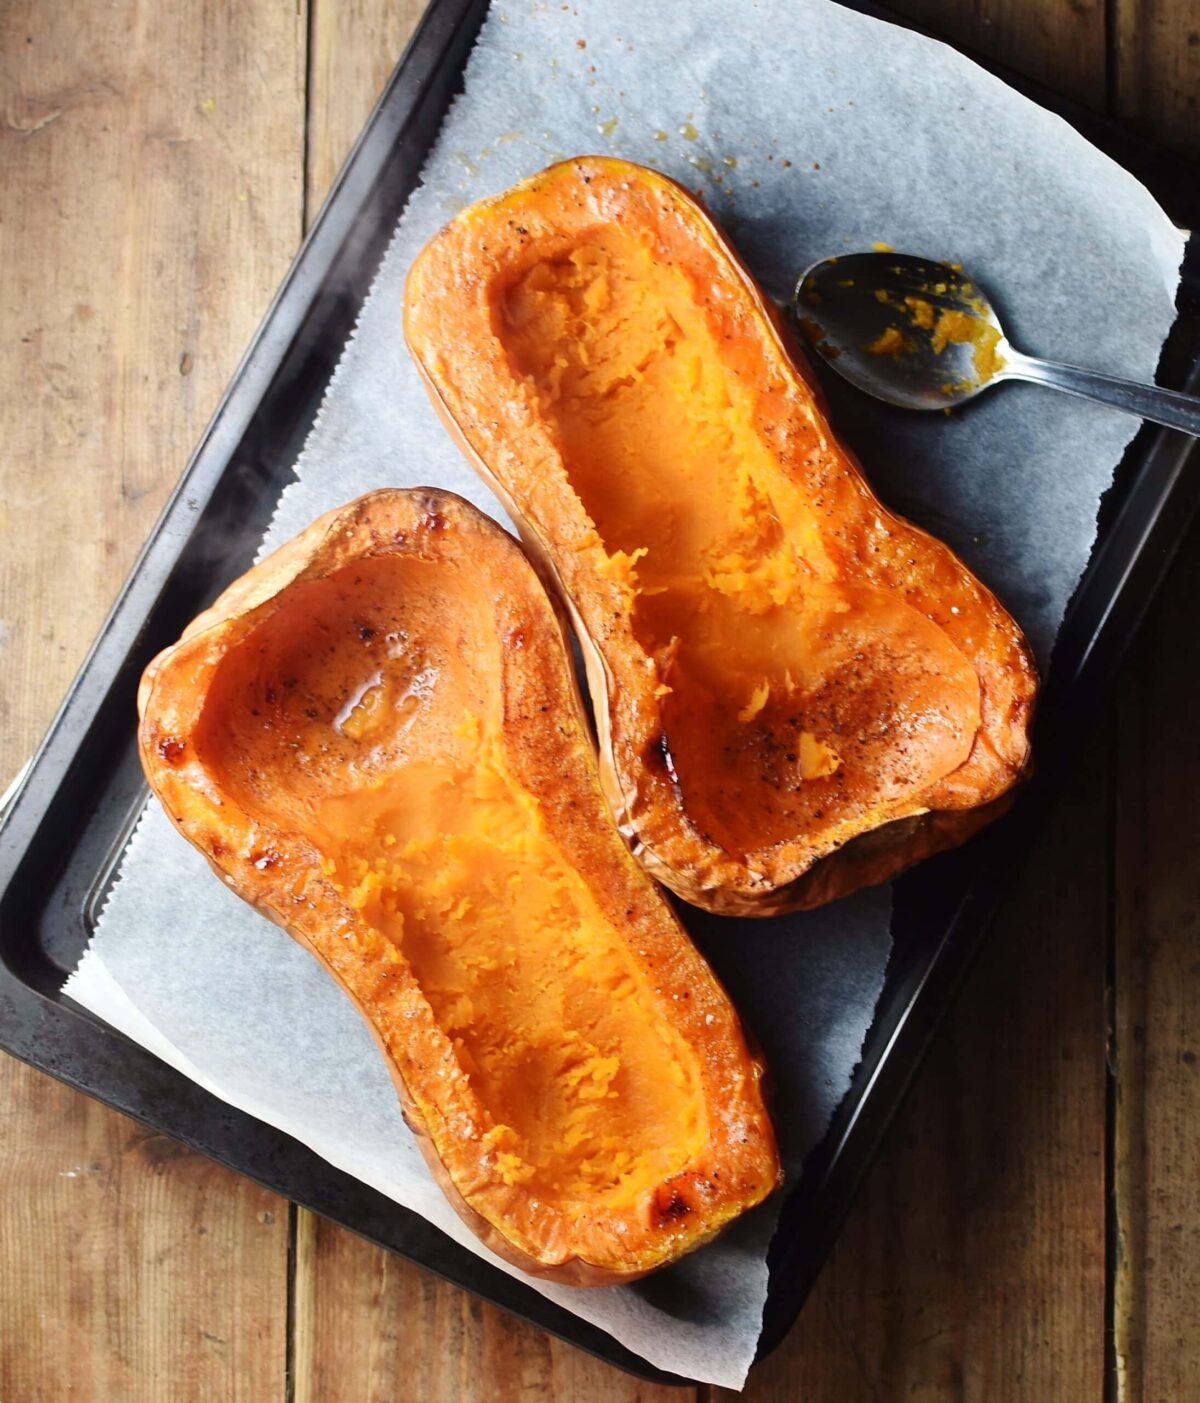 Roasted butternut squash halves with scooped out middle on top of baking sheet lined with paper and spoon.